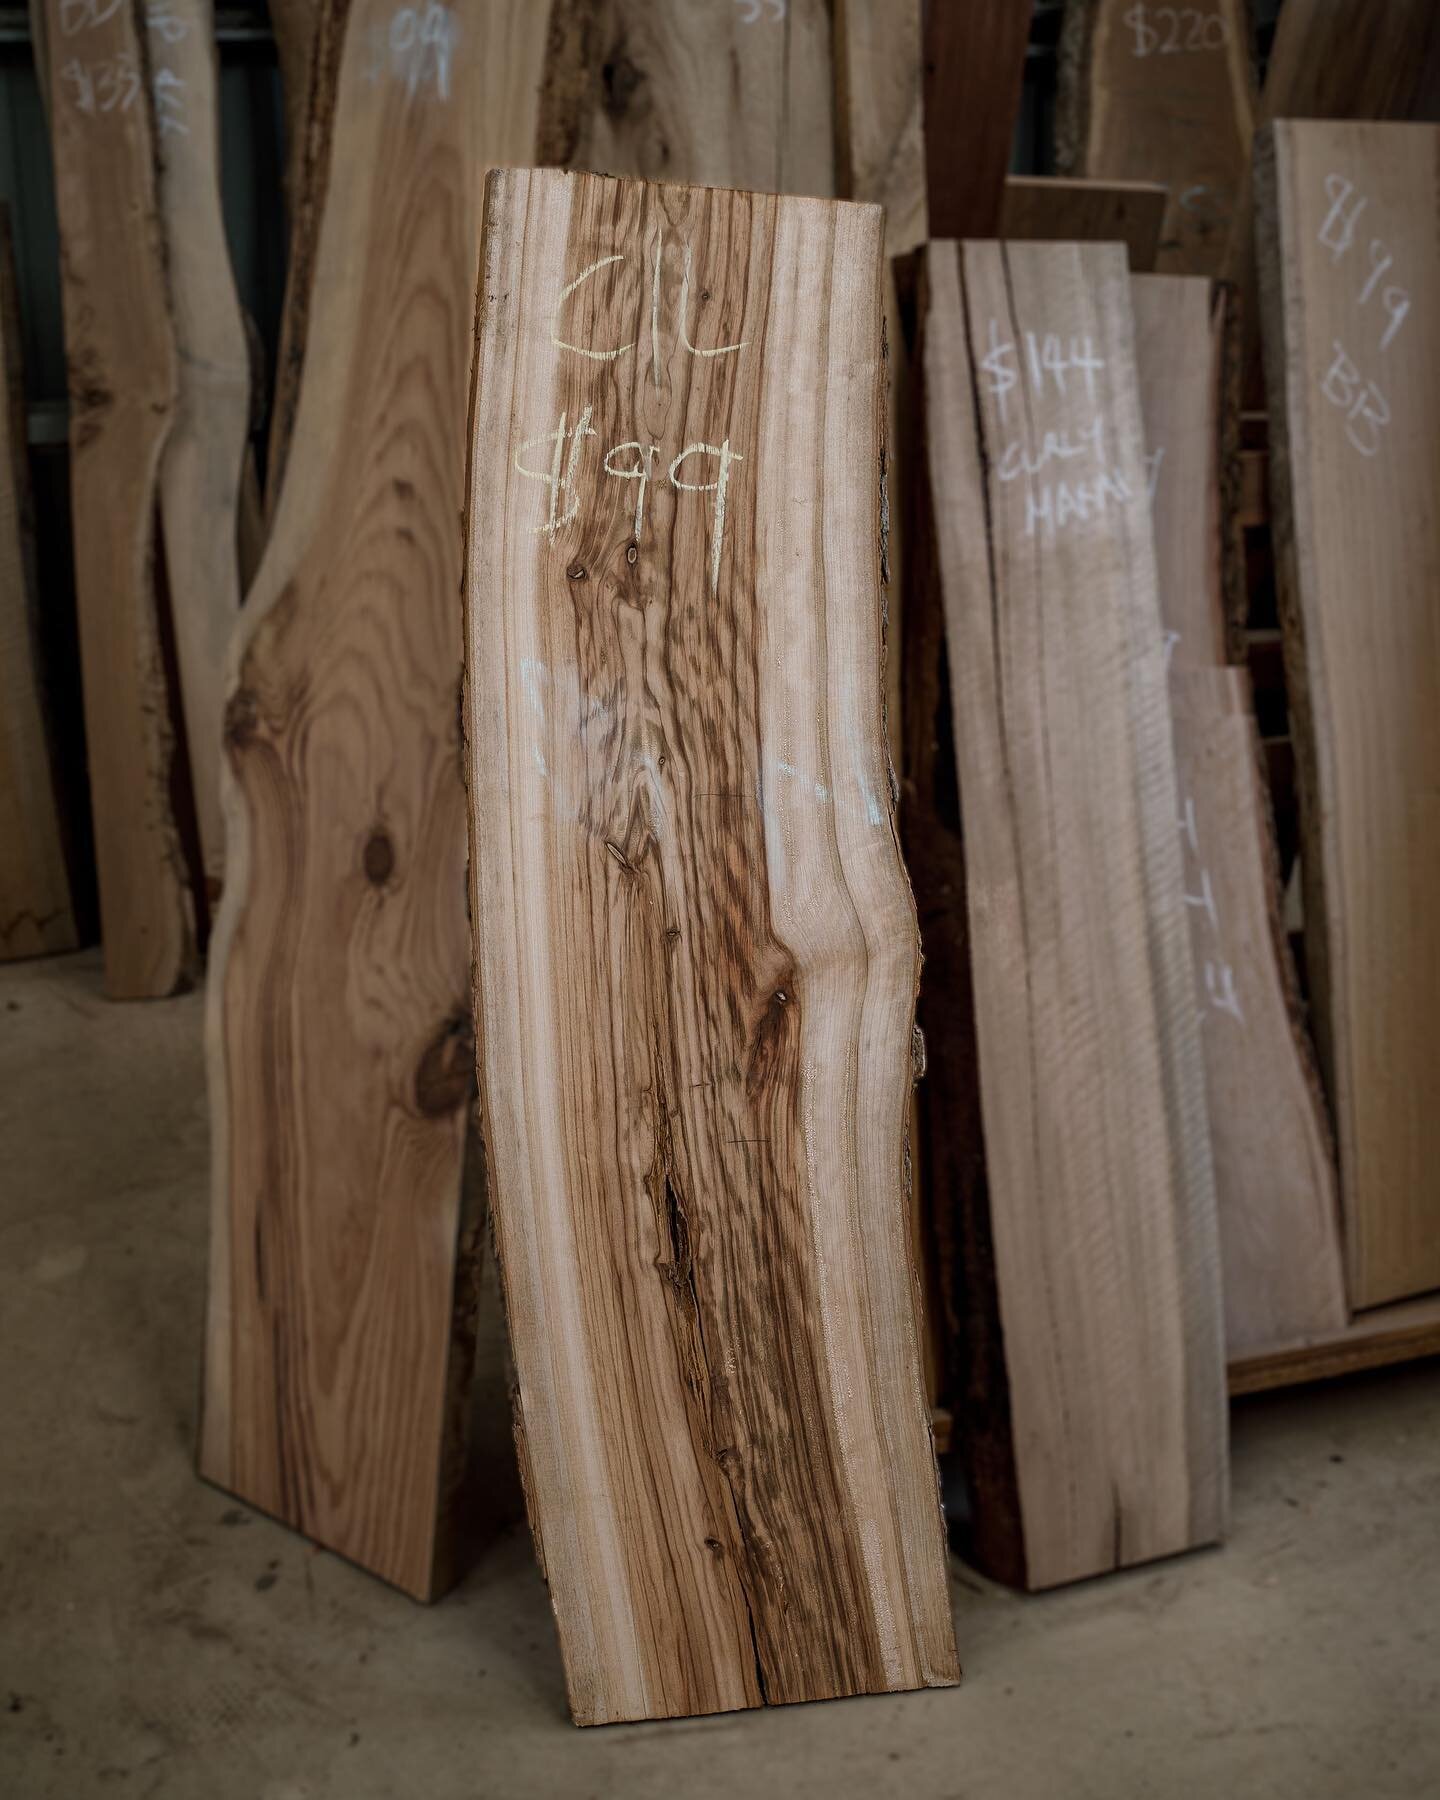 This eye watering cut of Camphor Laurel is in our showroom and ready to go. A smaller piece that definitely makes up for it in looks. Perfect for benches and coffee tables. Come and see! 

#blackwood #slabtable #coffeetables #interiorwood #woodinteri